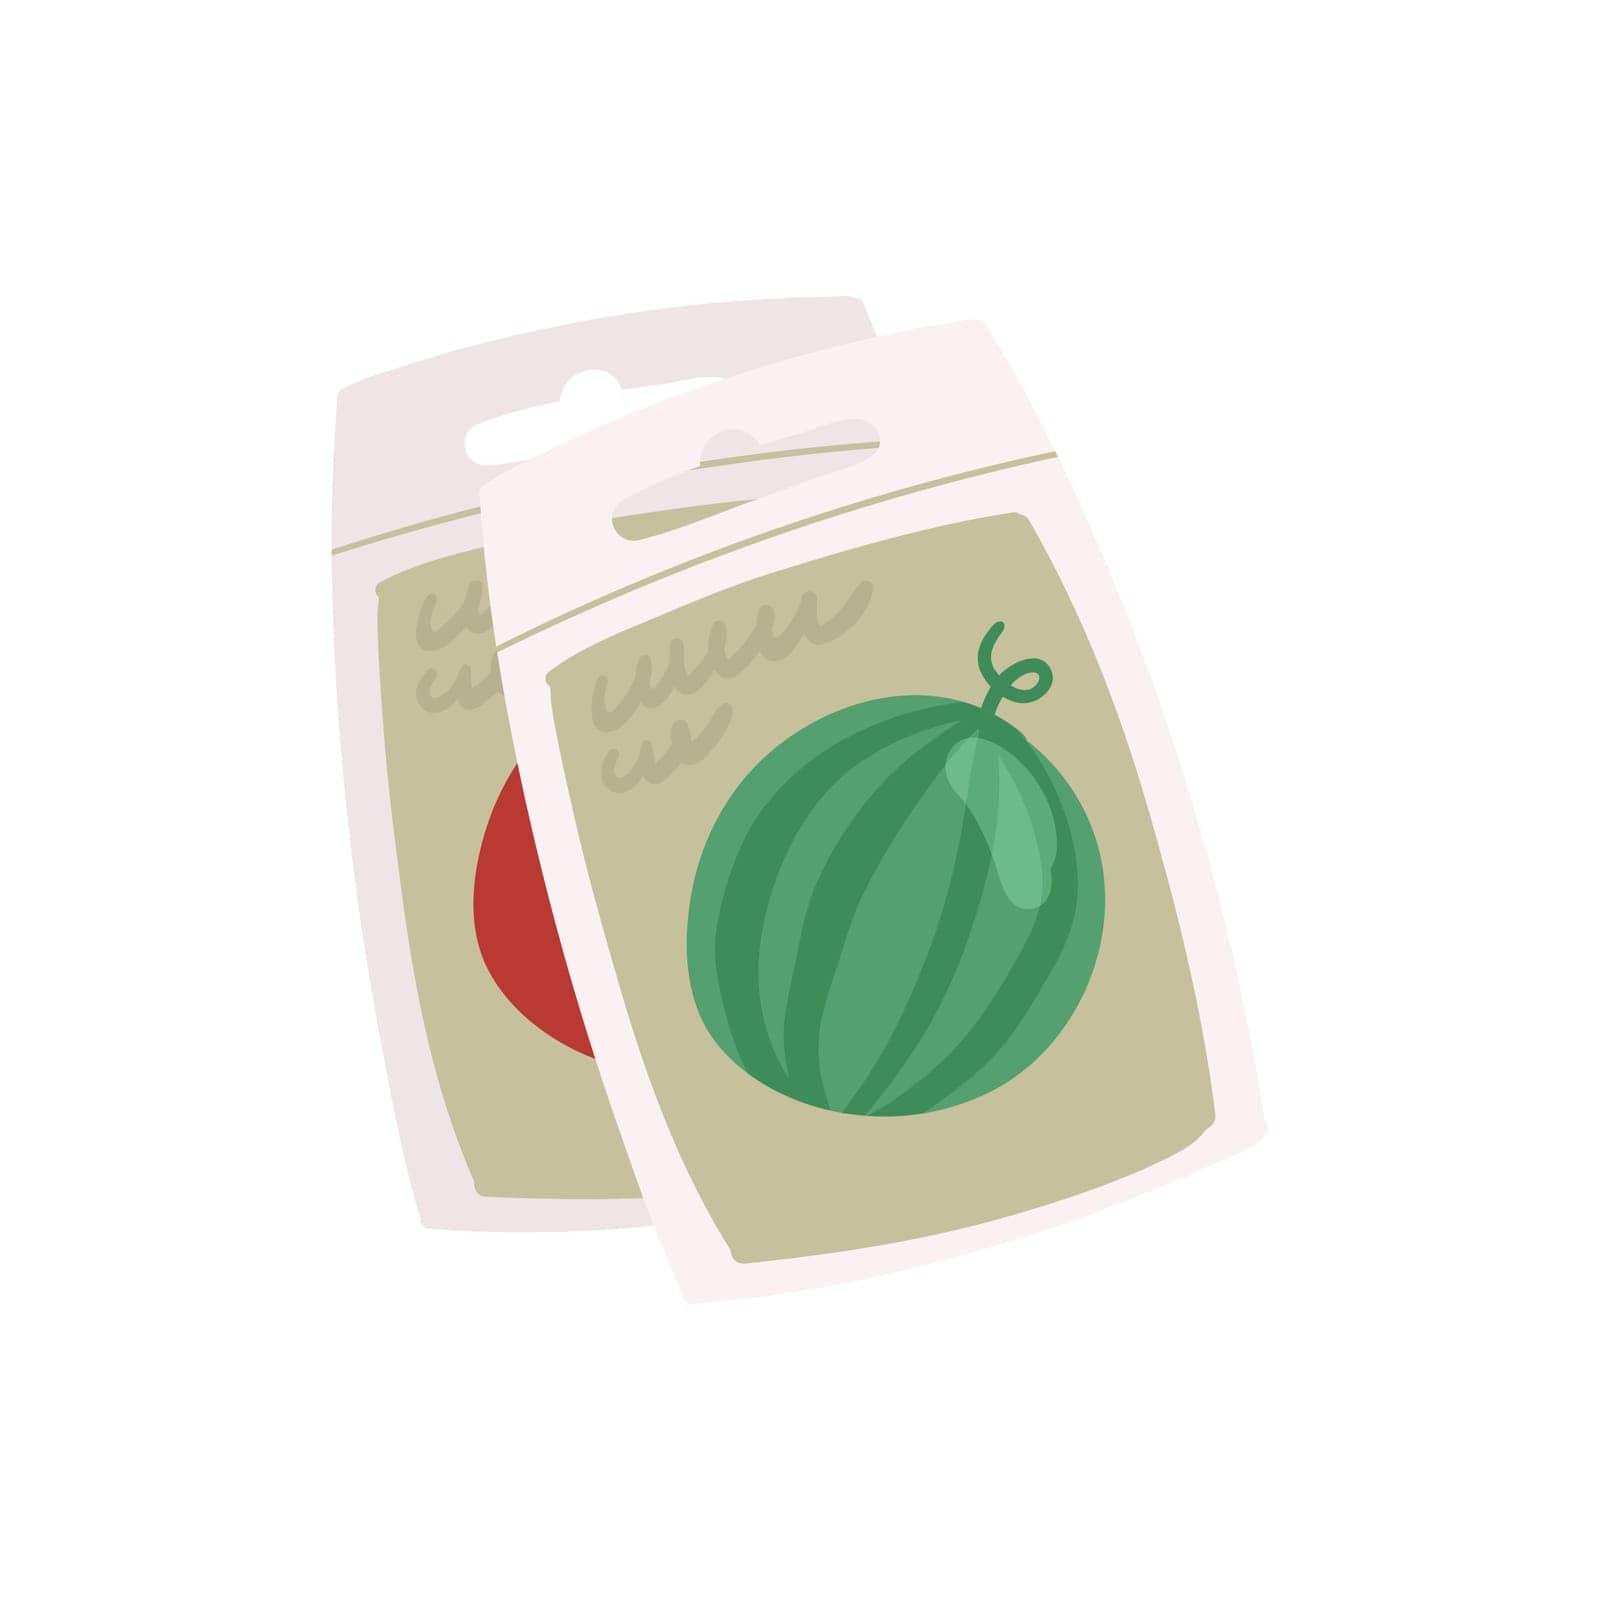 Farming seeds packs. Farming products, growing fruits and vegetables flat vector illustration